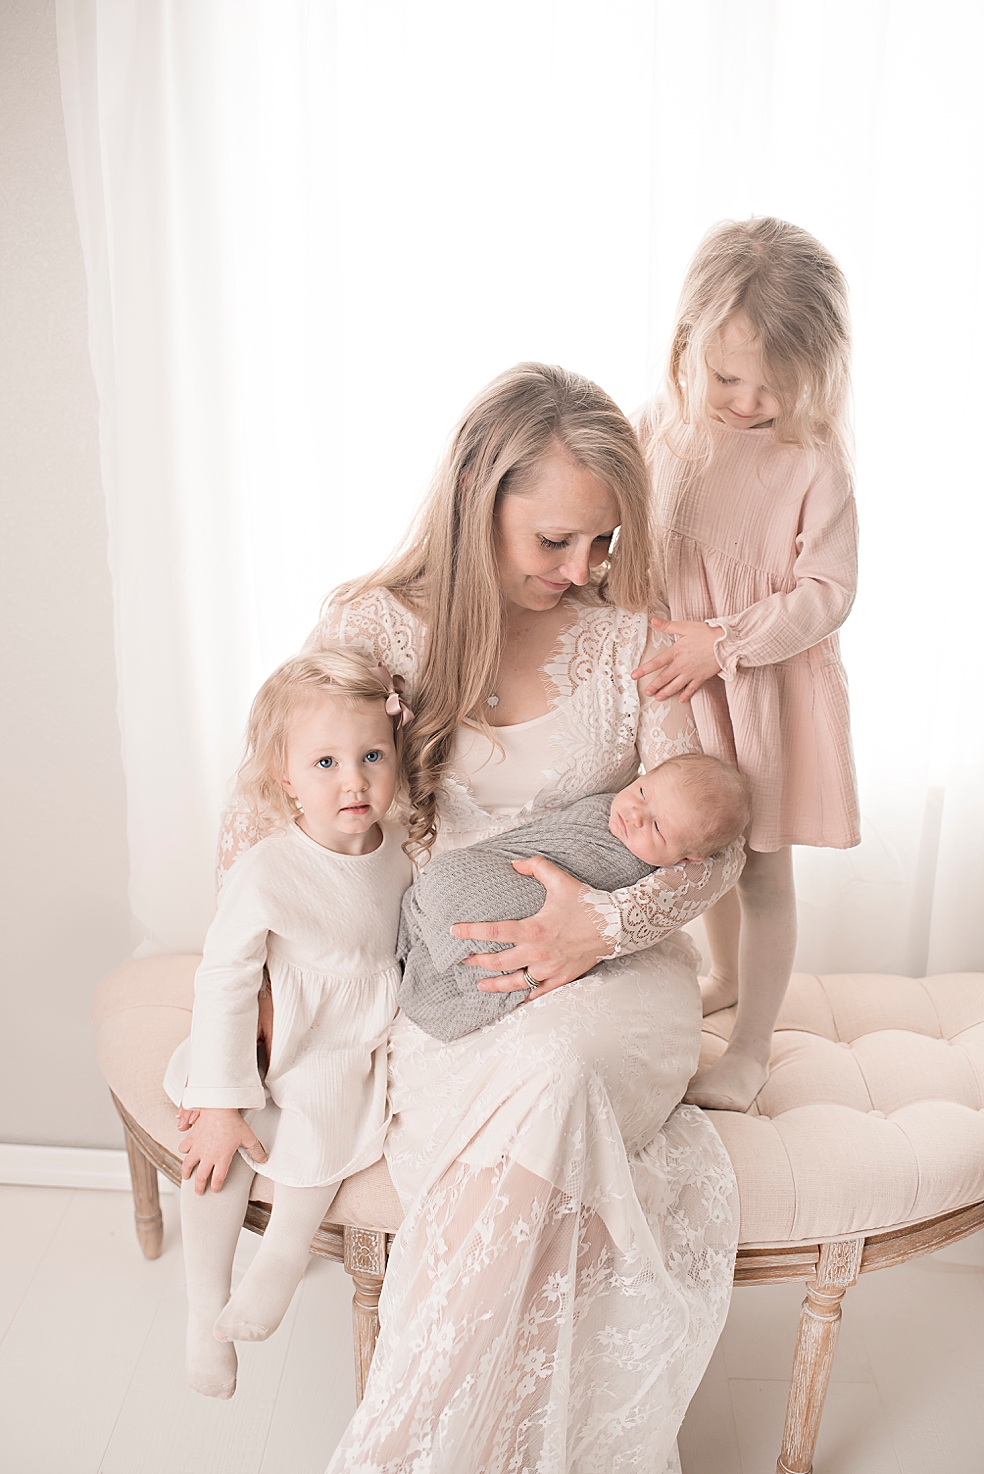 Mom and two daughters admiring newborn baby boy | Photo by Jessica Lee Photography